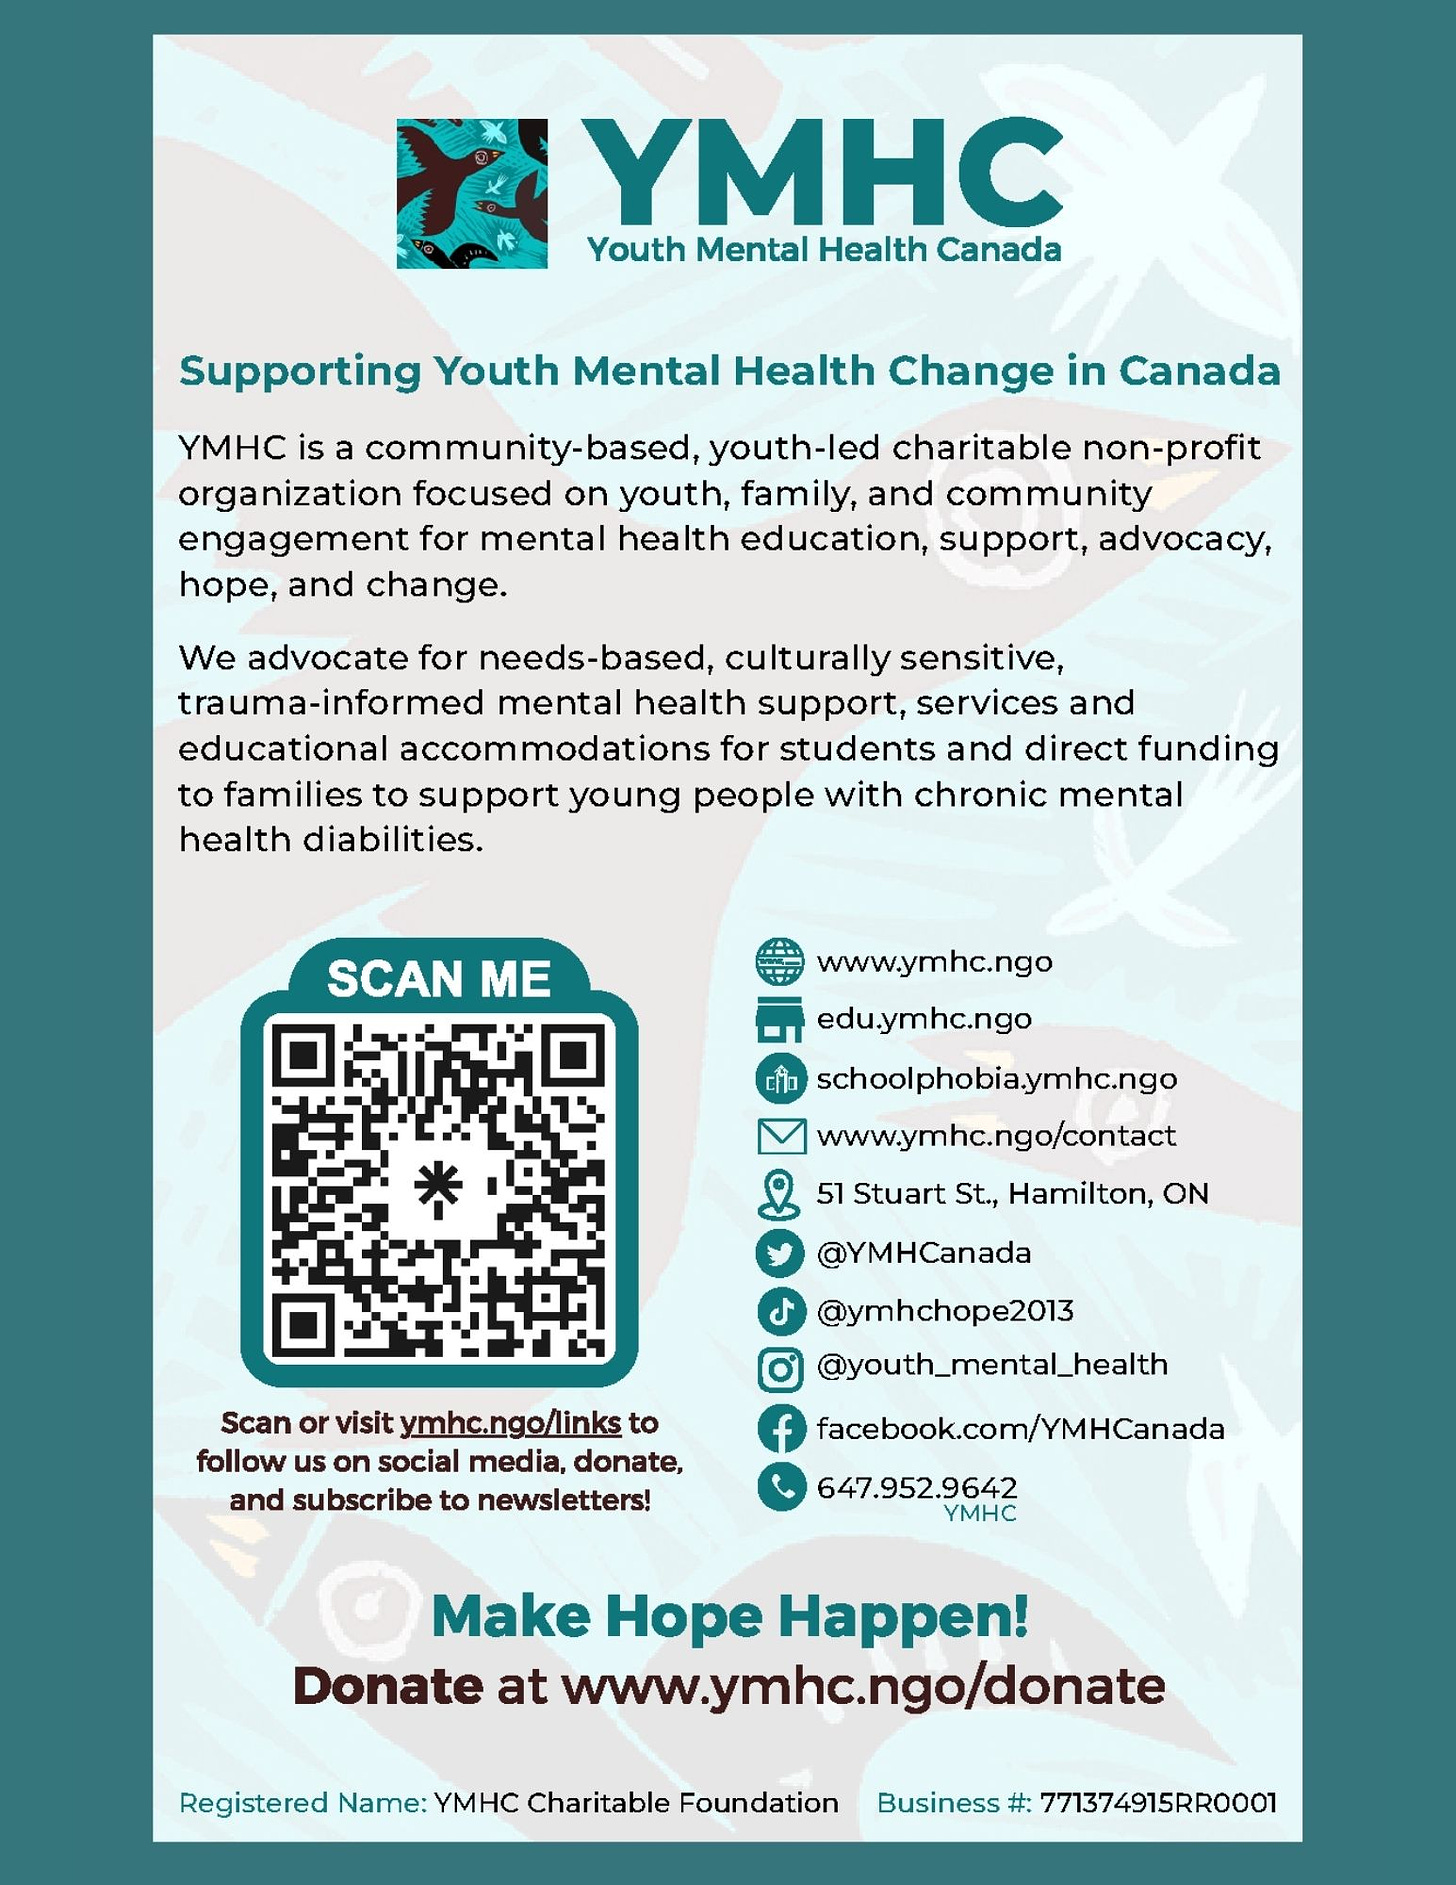 Supporting Youth Mental Health Change in Canada YMHC is a community-based, youth-led charitable non-profit organization focused on youth, family, and community engagement for mental health education, support, advocacy, hope, and change. We advocate for needs-based, culturally sensitive, trauma-informed mental health support, services and educational accommodations for students and direct funding to families to support young people with chronic mental health diabilities. 